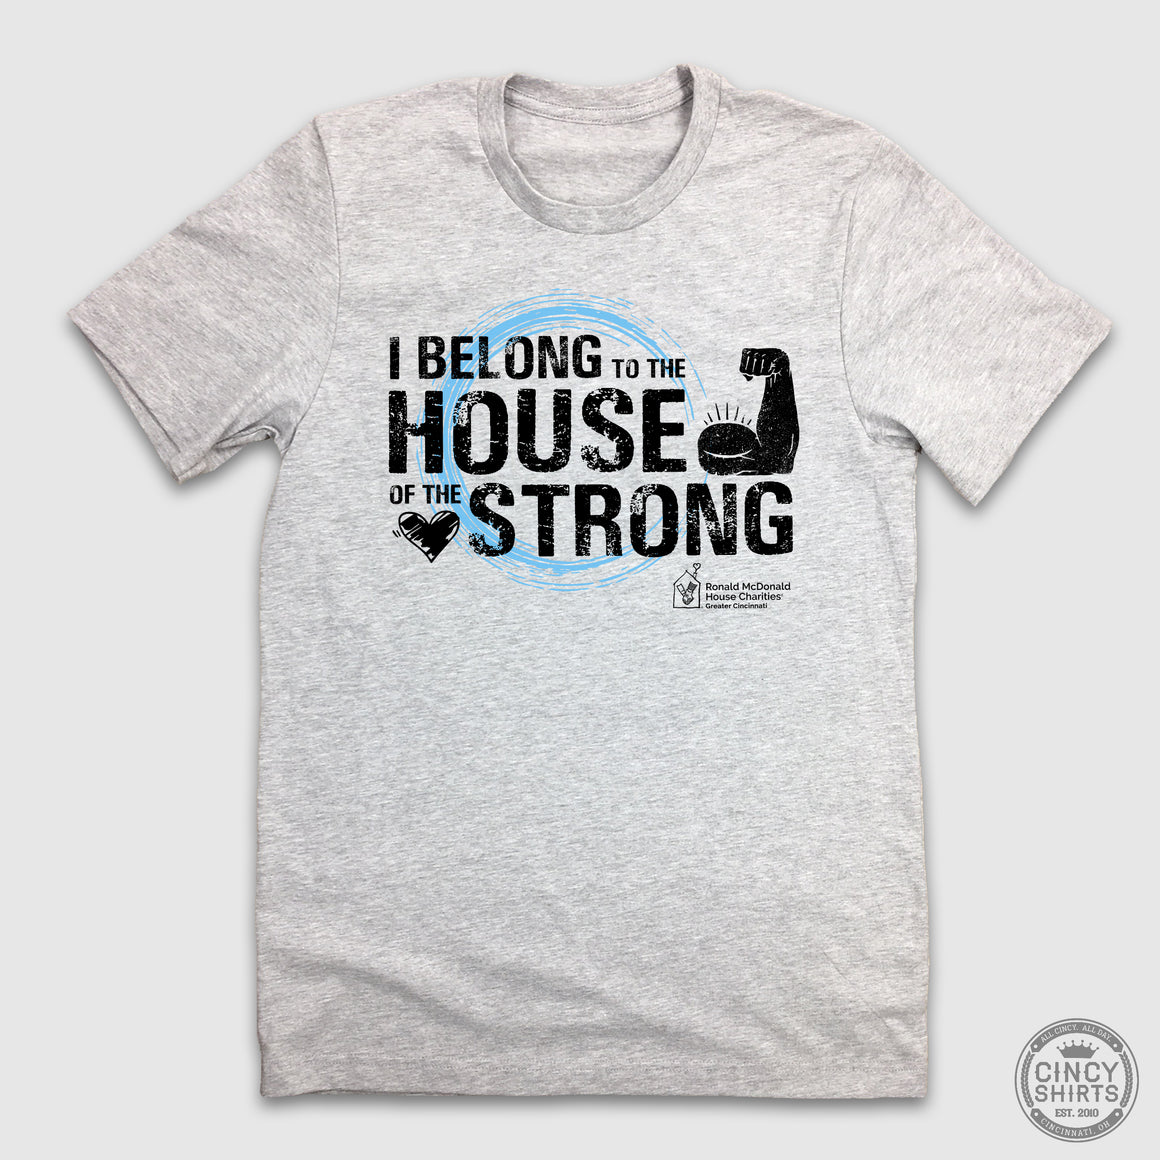 I Belong to the House of the Strong - Ronald McDonald House - Cincy Shirts